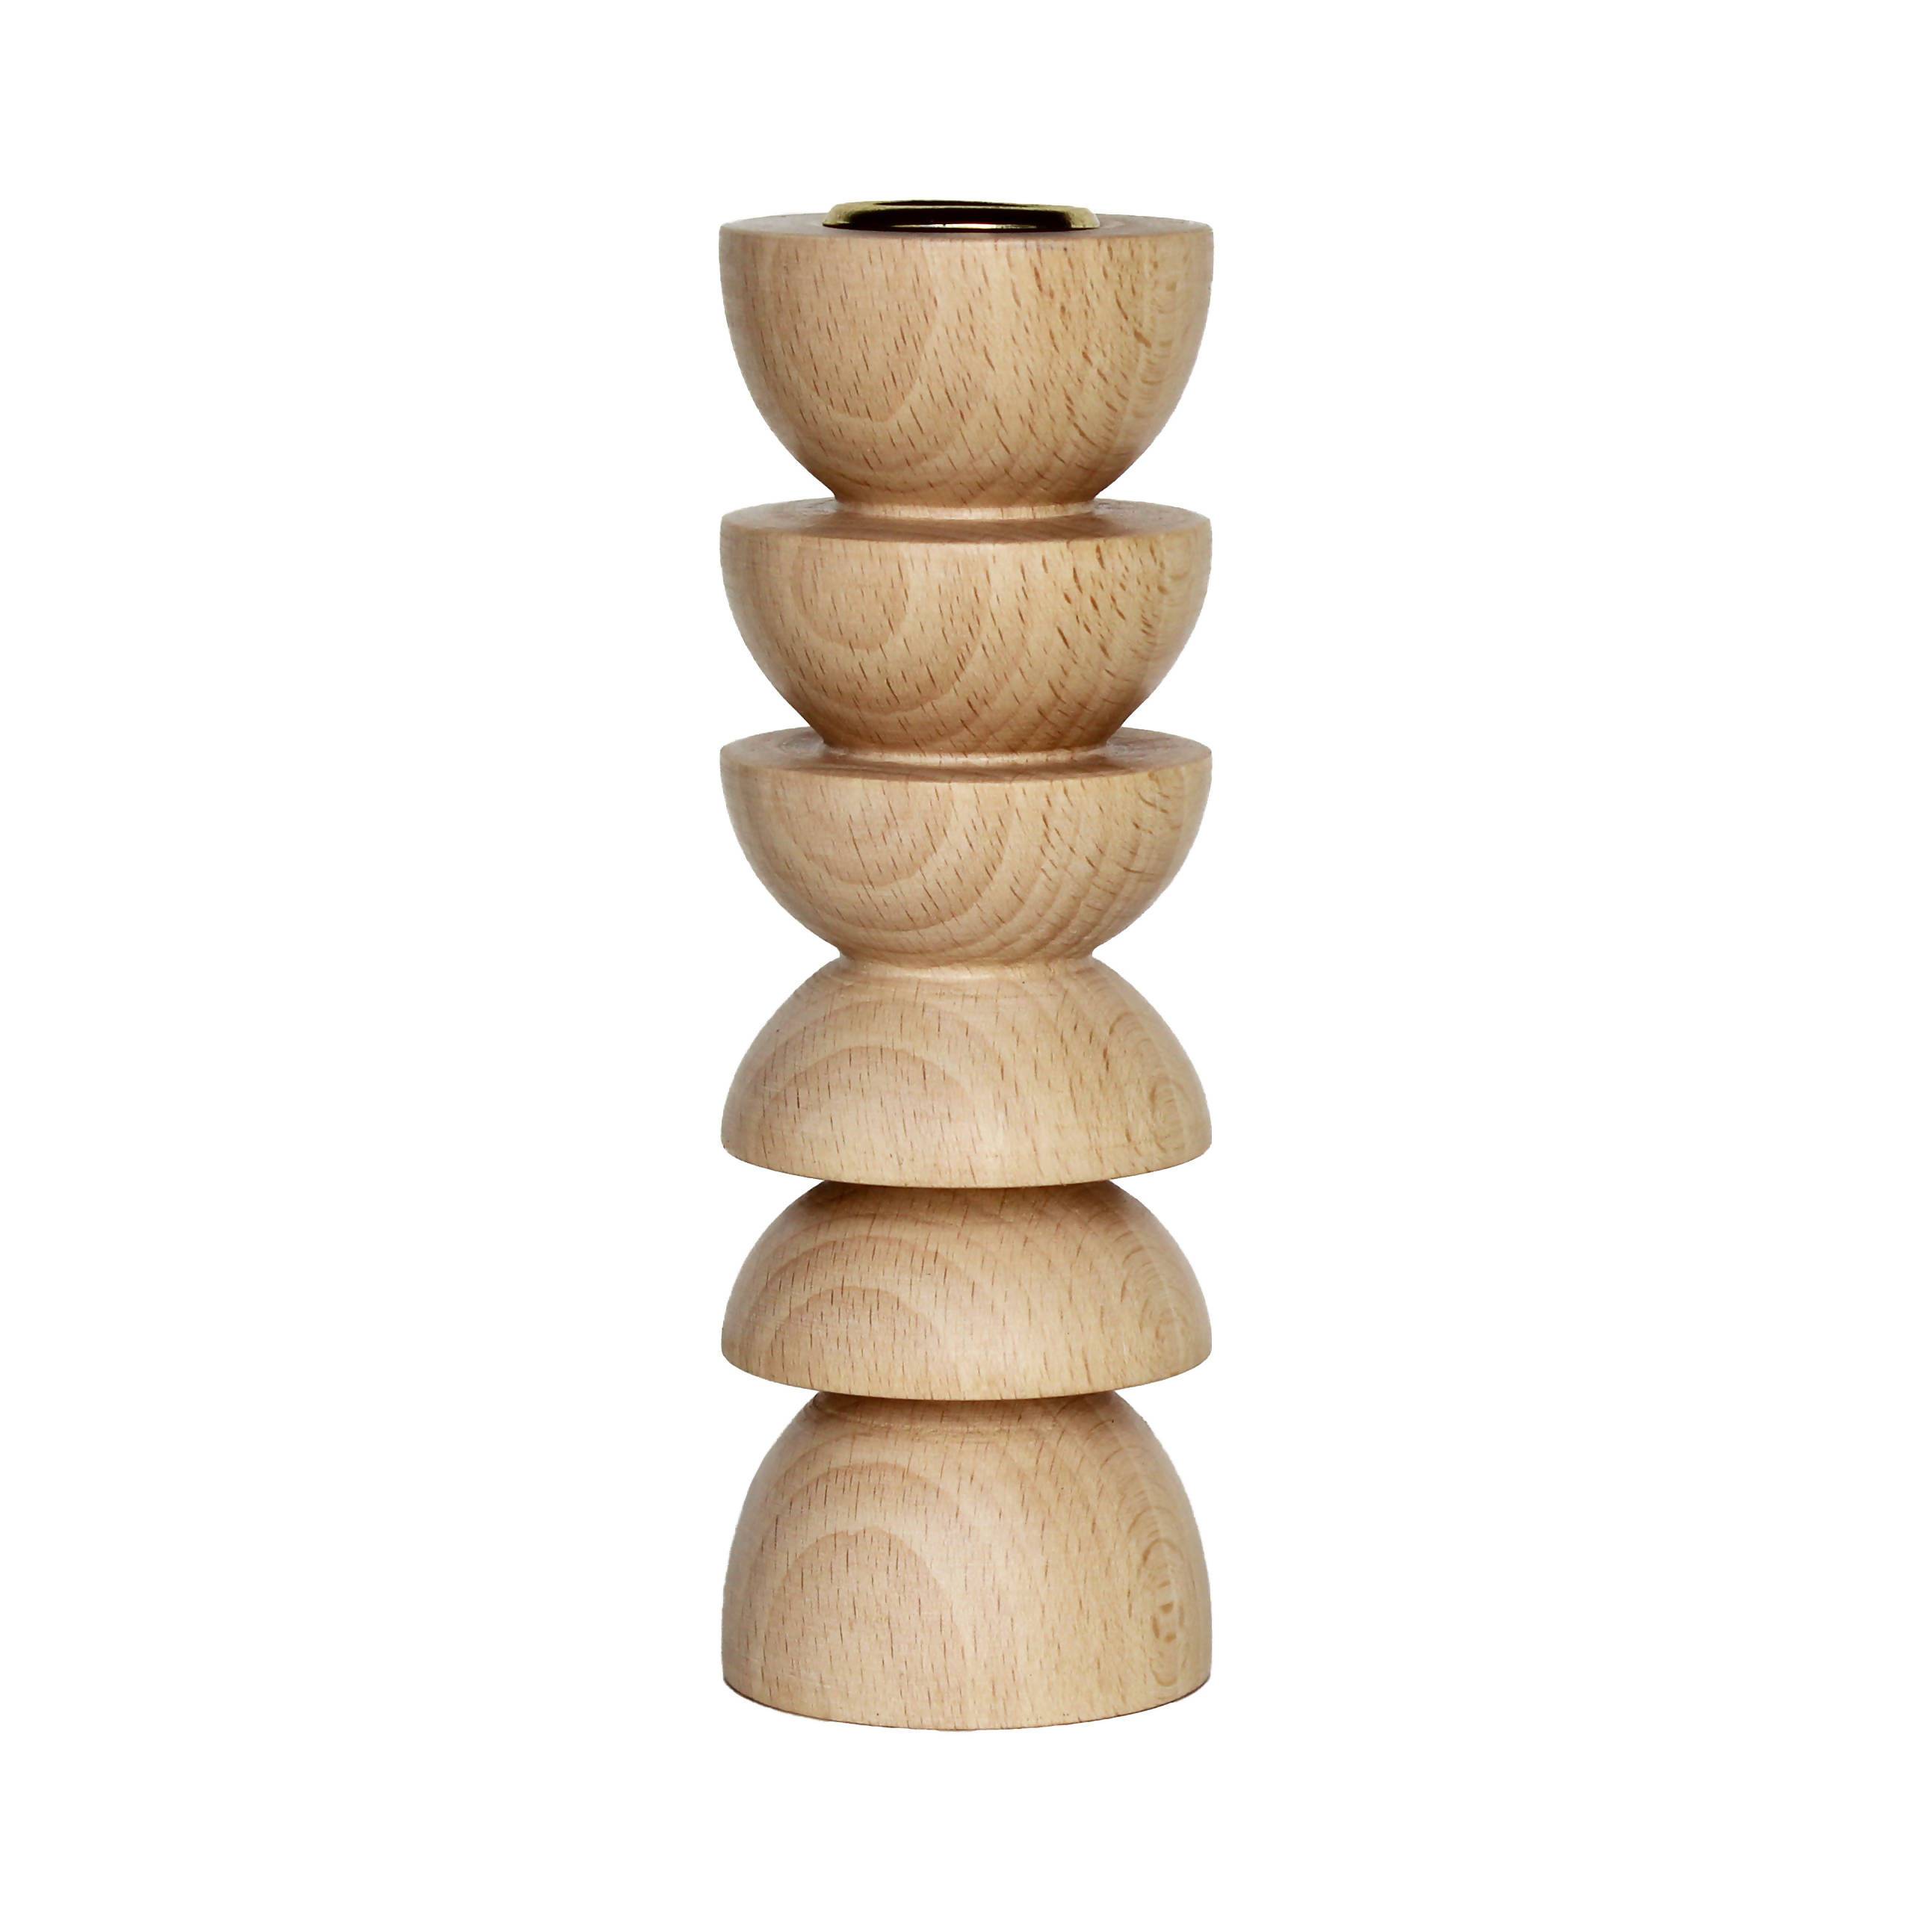 Totem Wooden Candle Holder - Tall Nr. 4 Home Decor 5mm Paper 